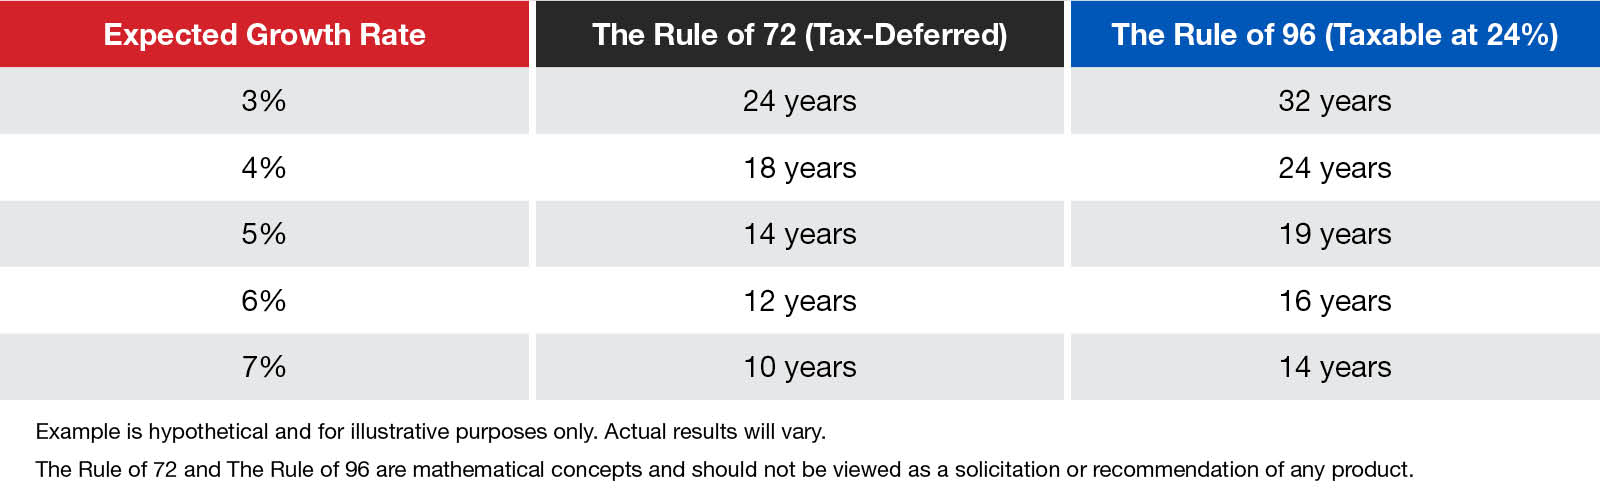 This chart illustrates how each of these rules work using rates from 3% to 7%.